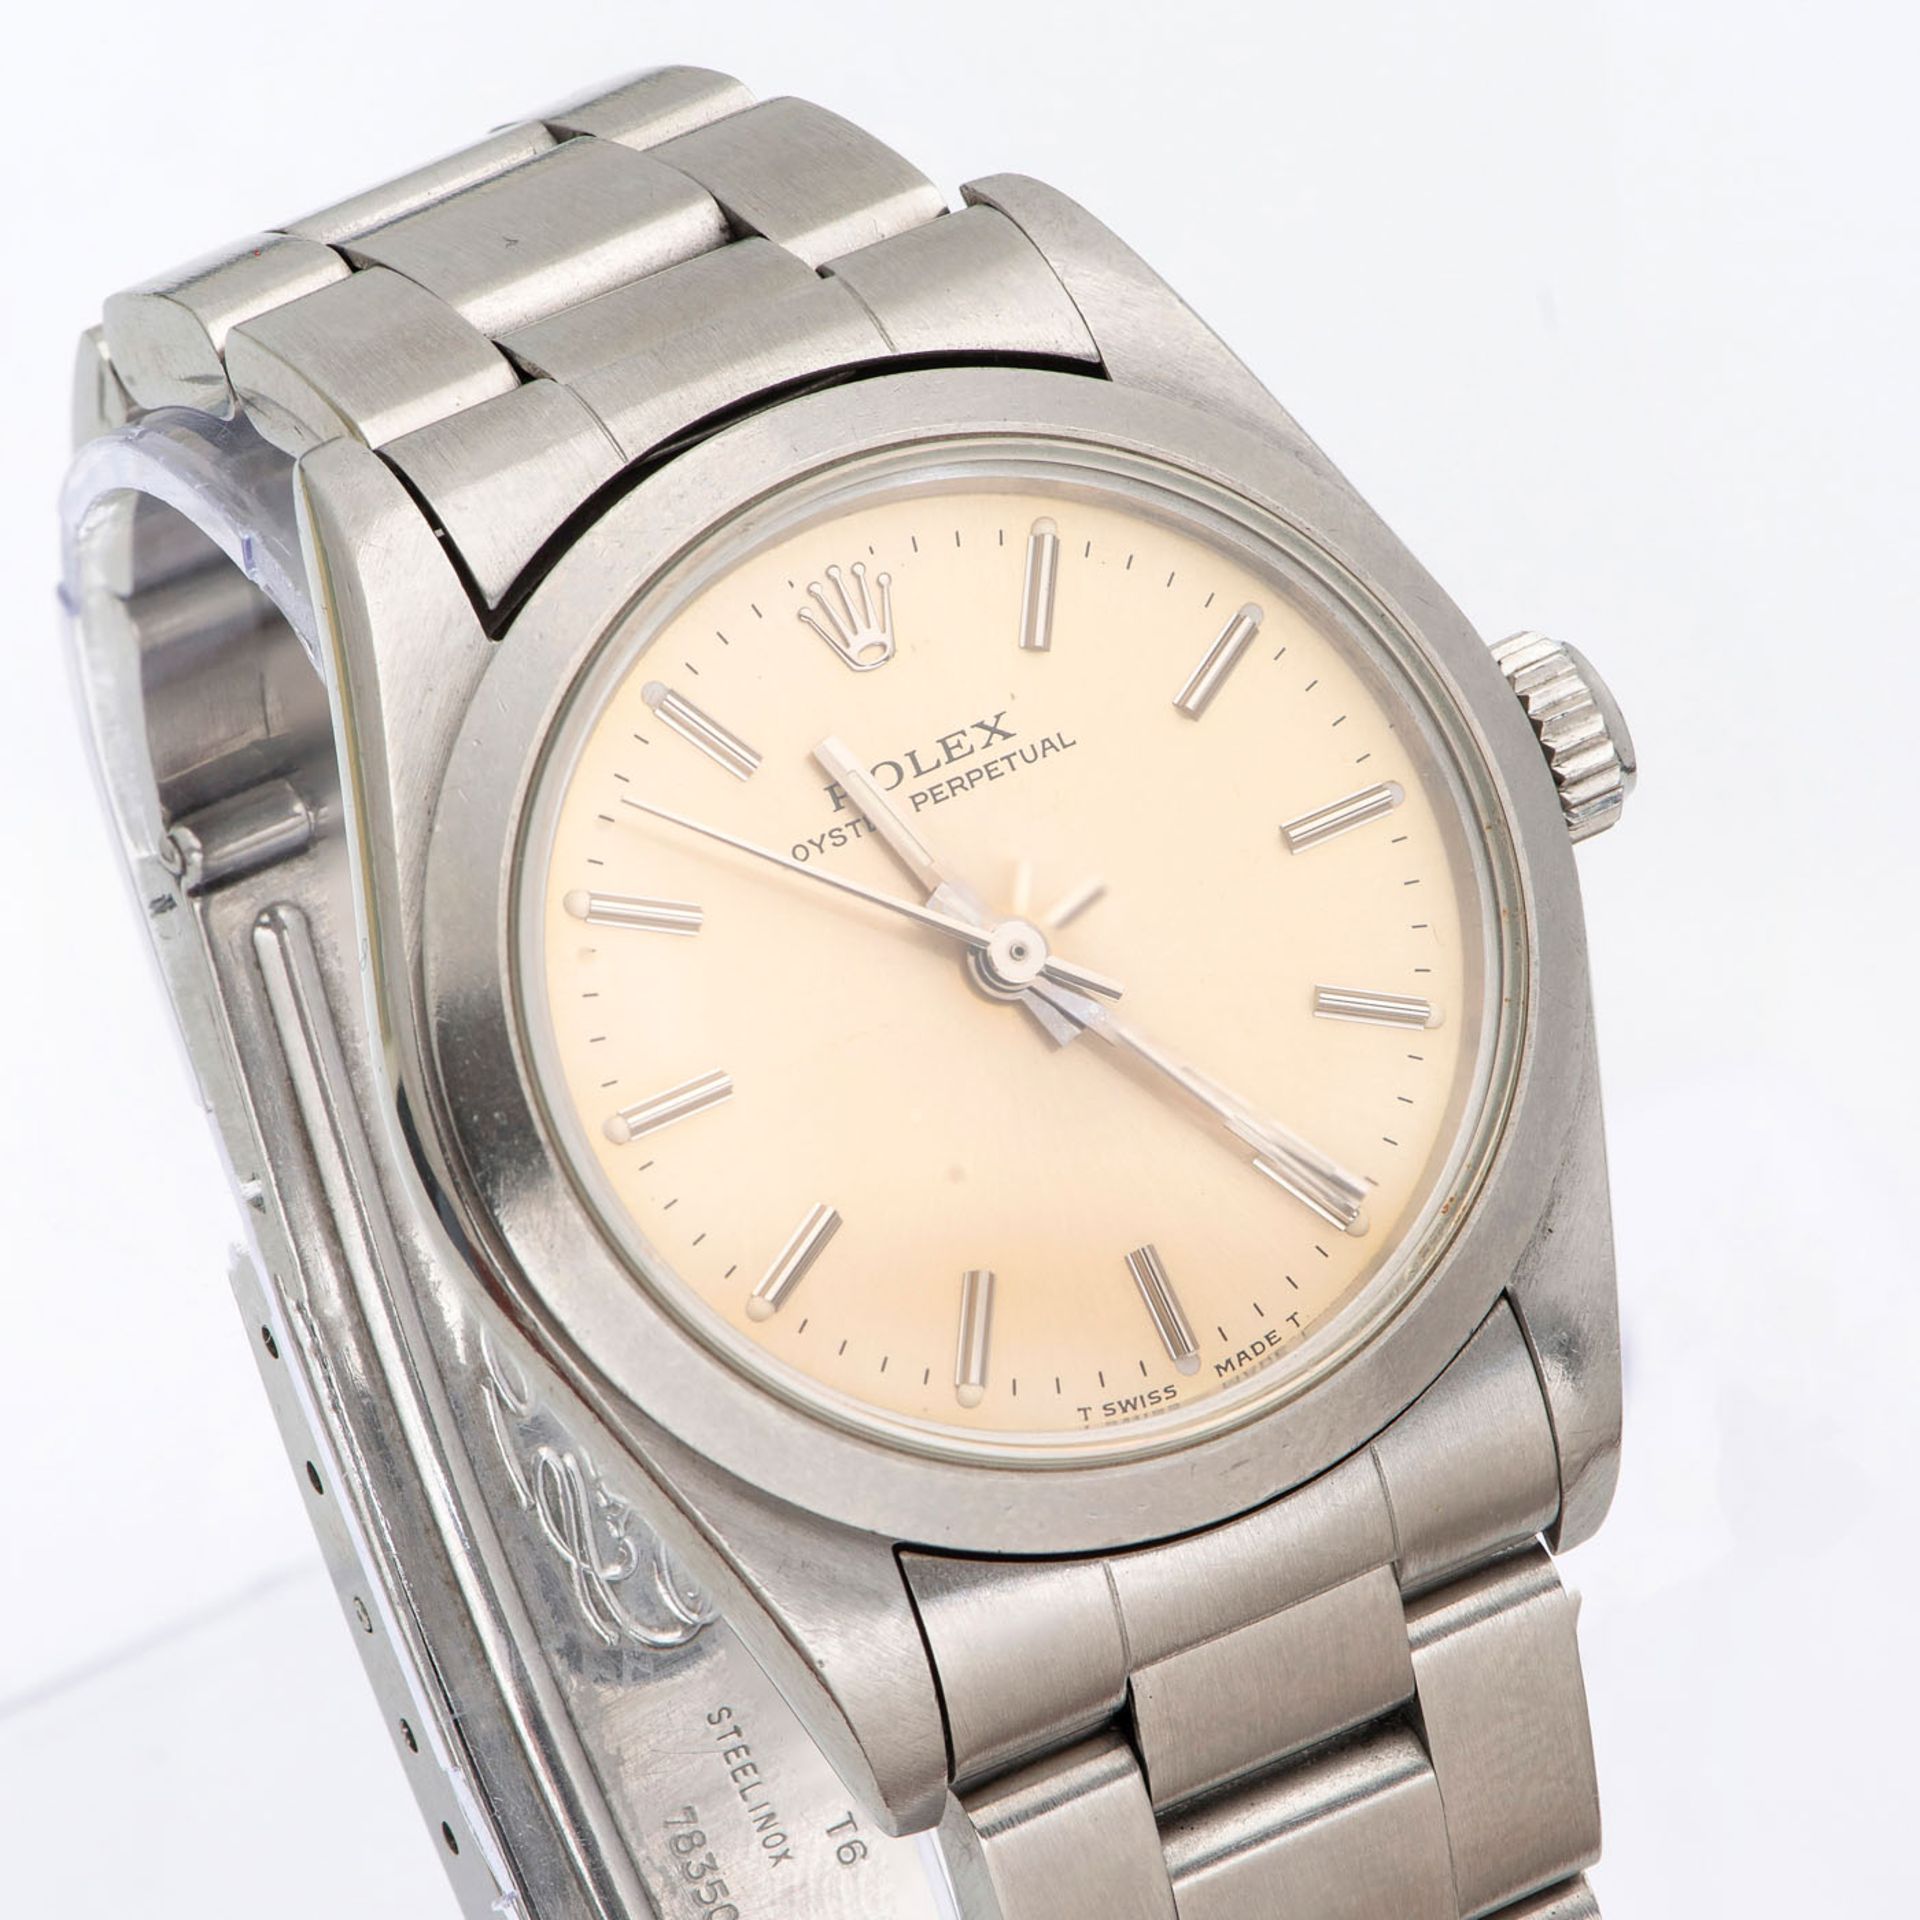 A Rolex Oyster Perpetual Wristwatch - Image 4 of 4